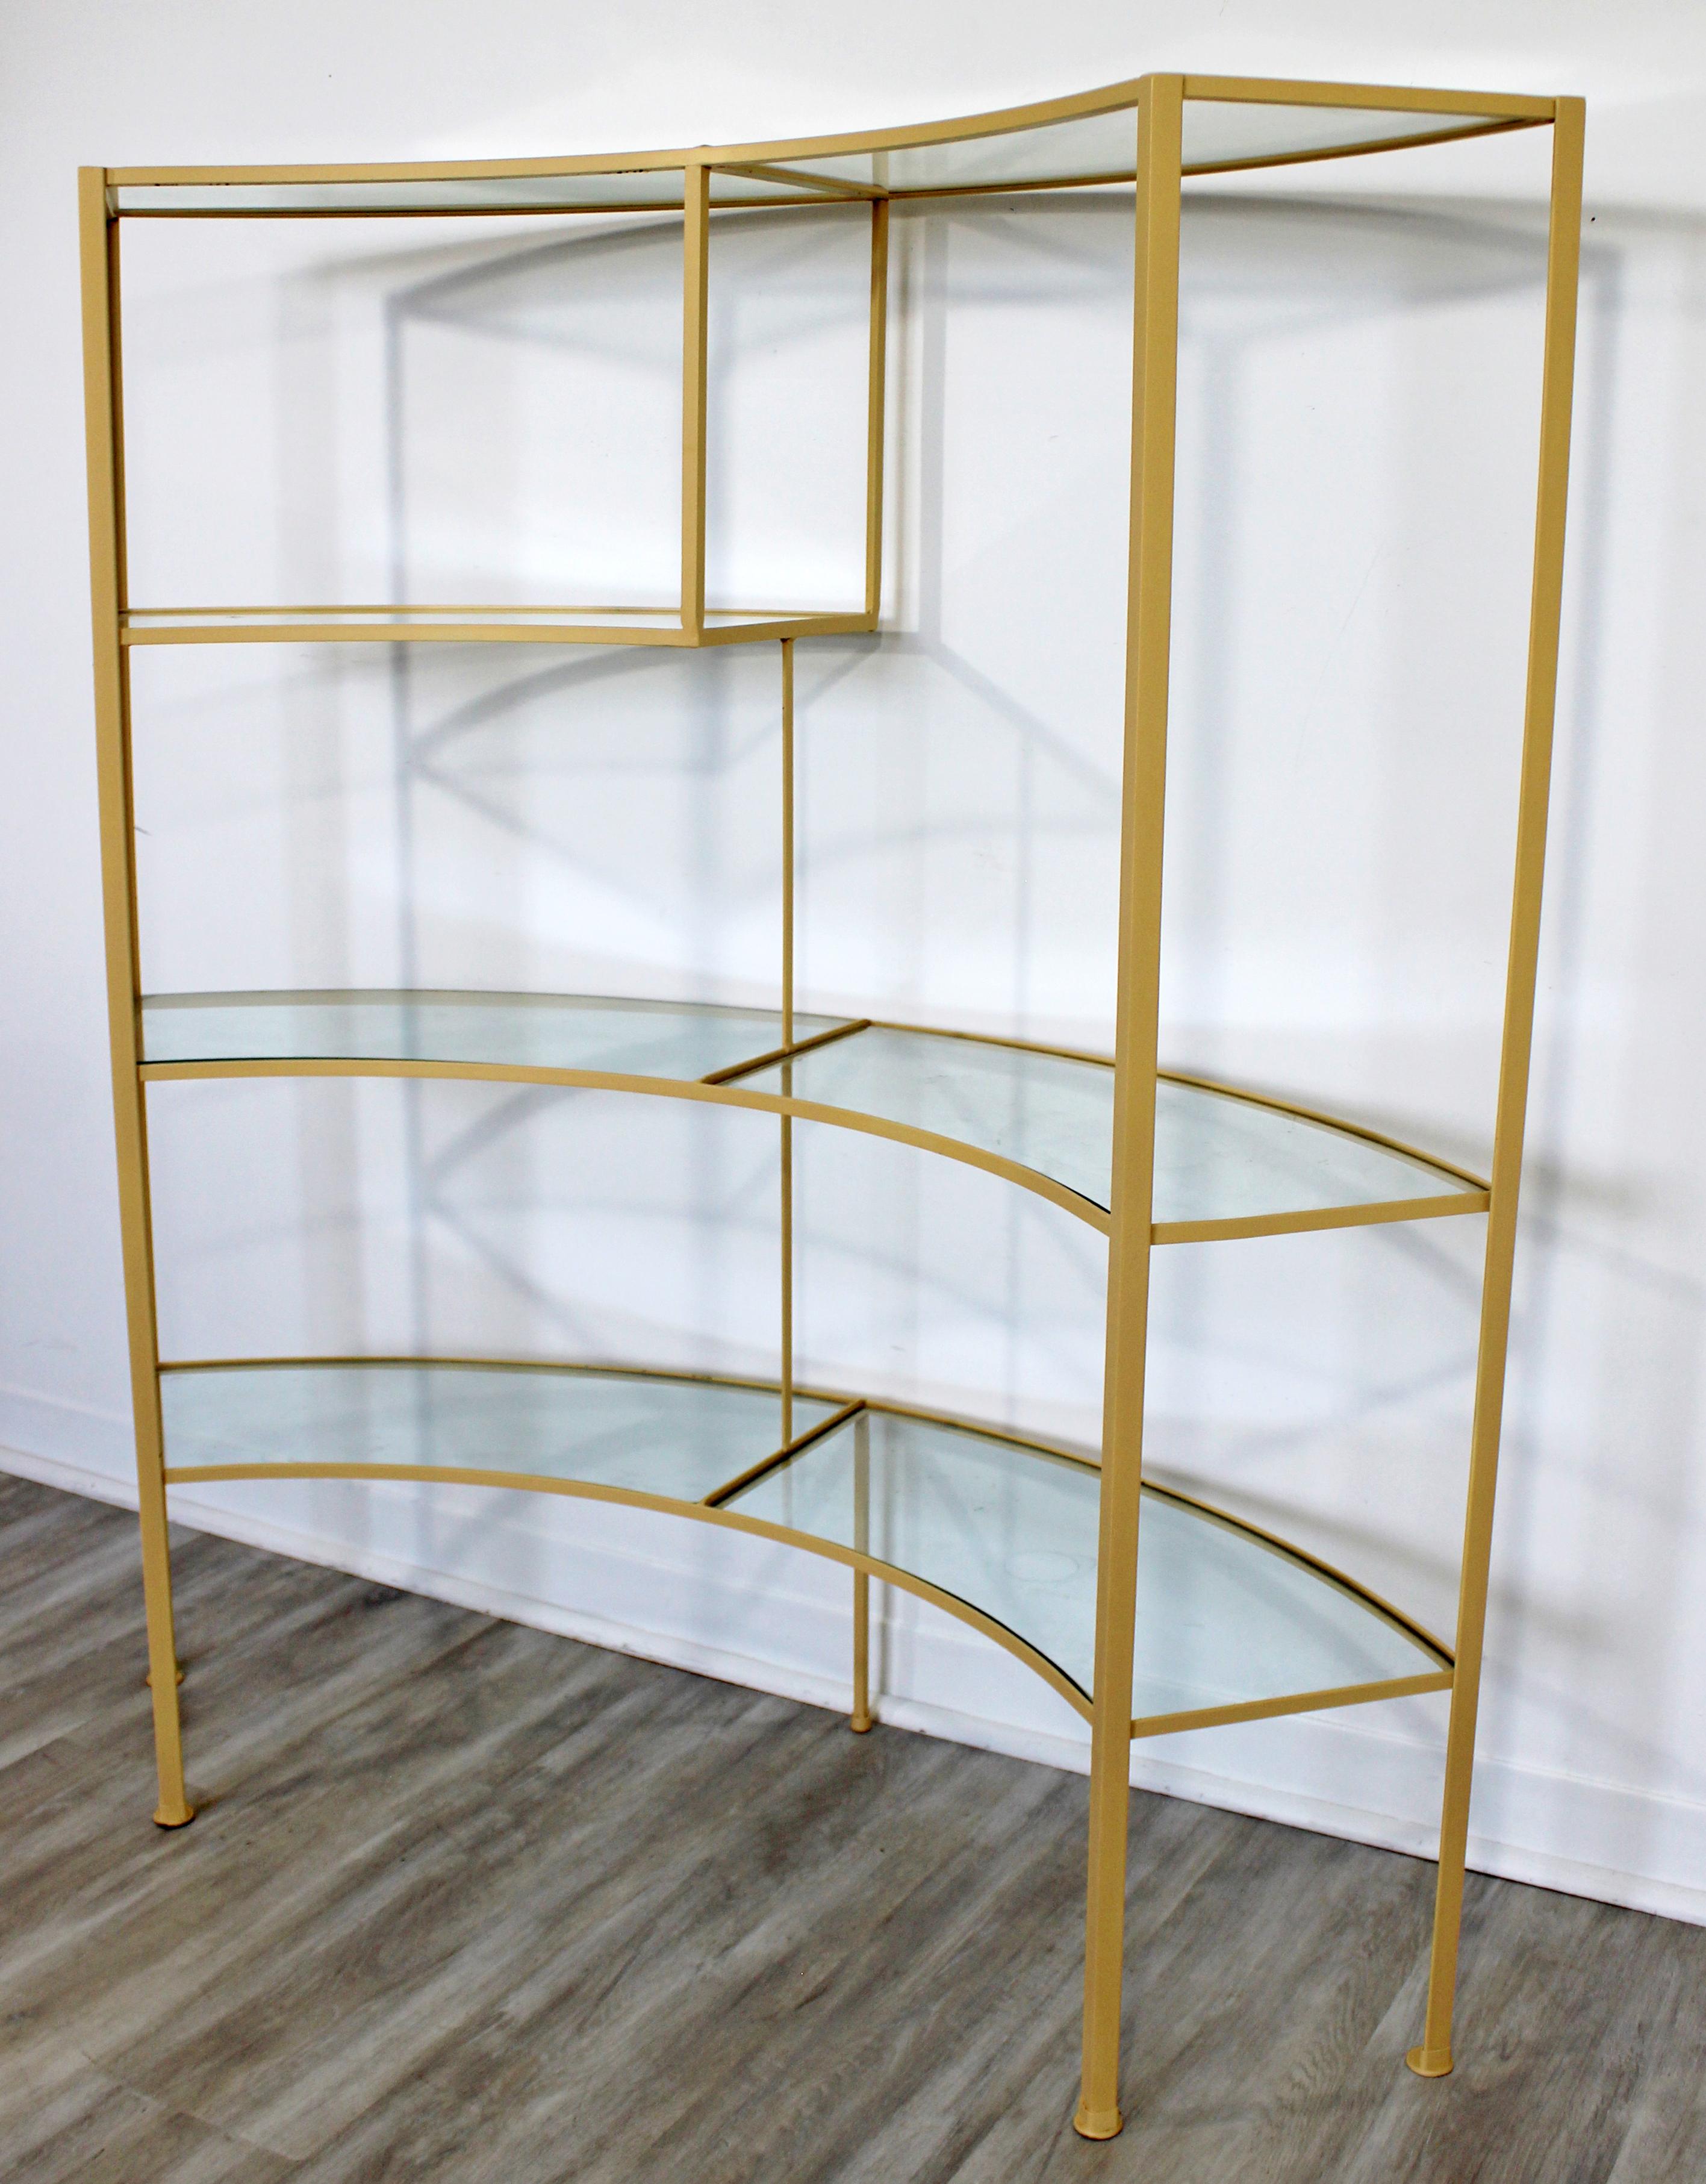 curved shelving unit